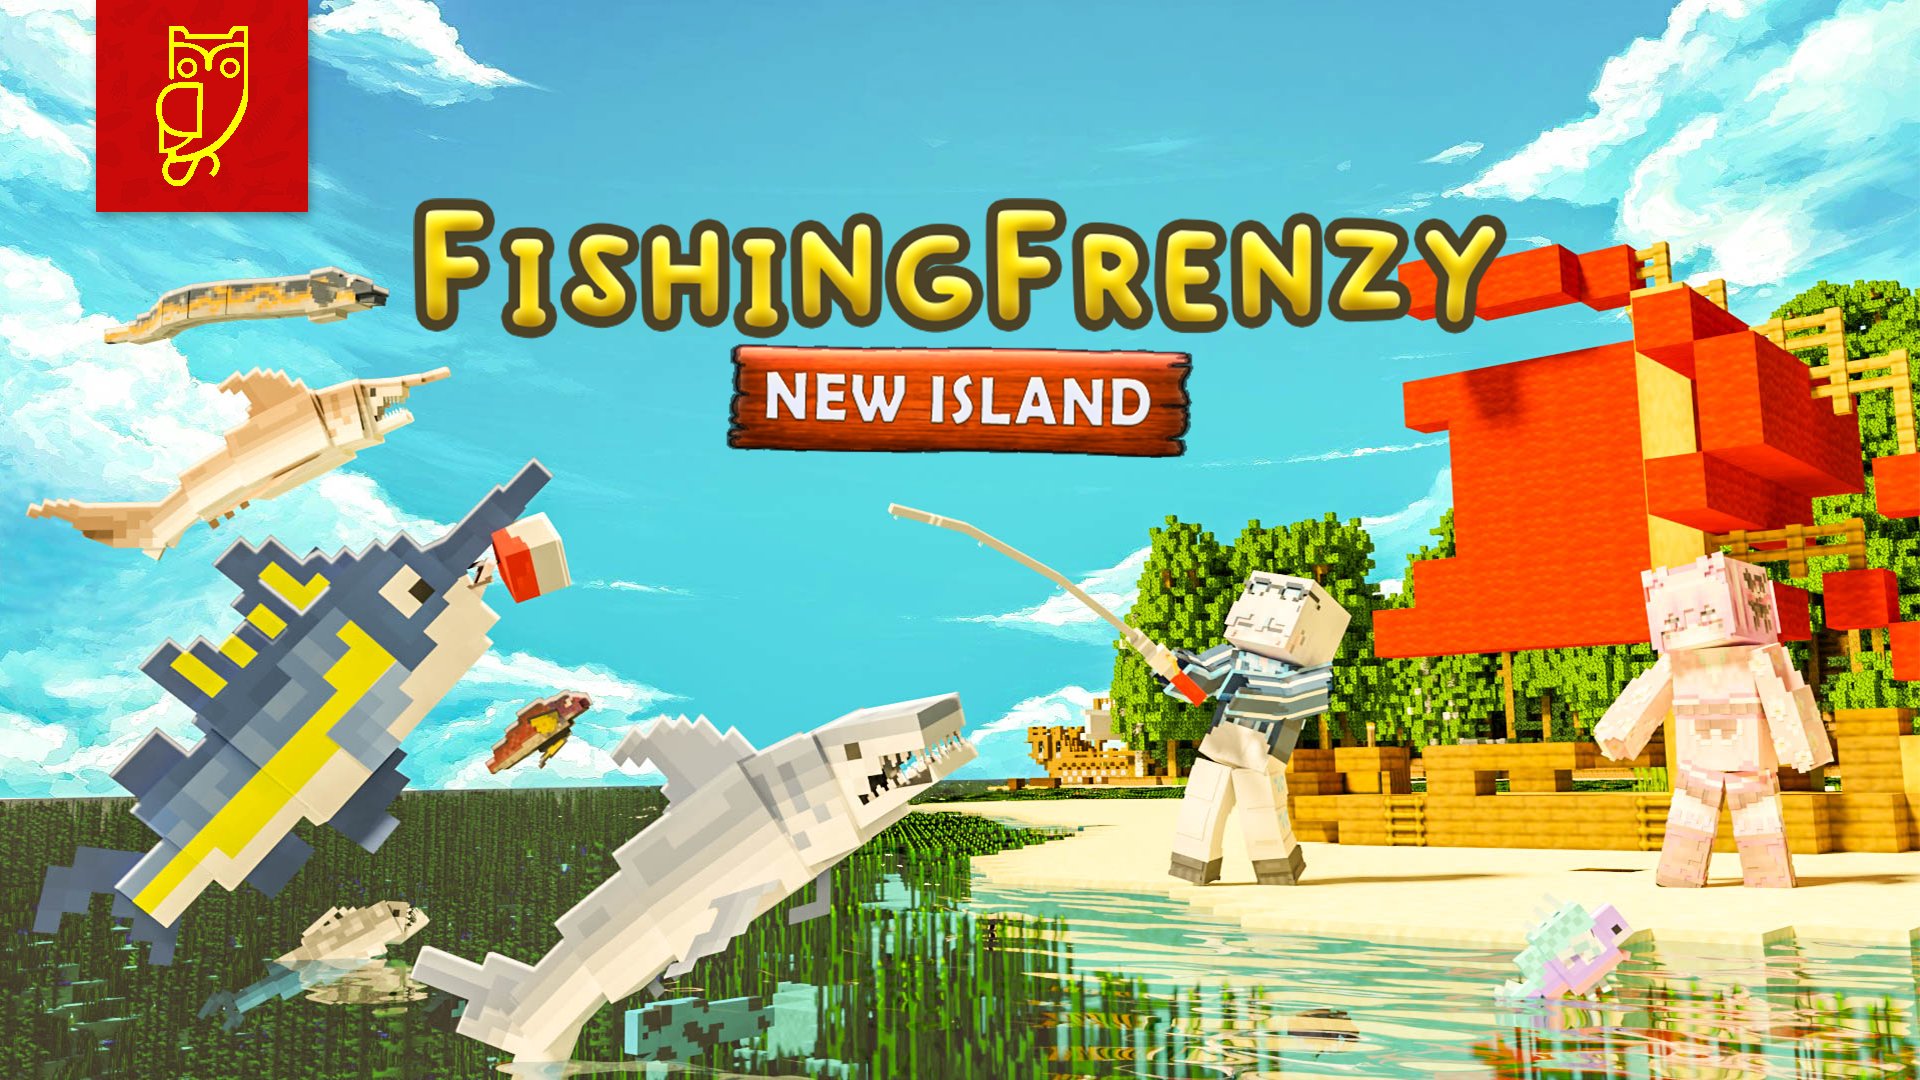 DeliSoft Studios on X: 🐠🐡🦈Fishing frenzy is a soothing game